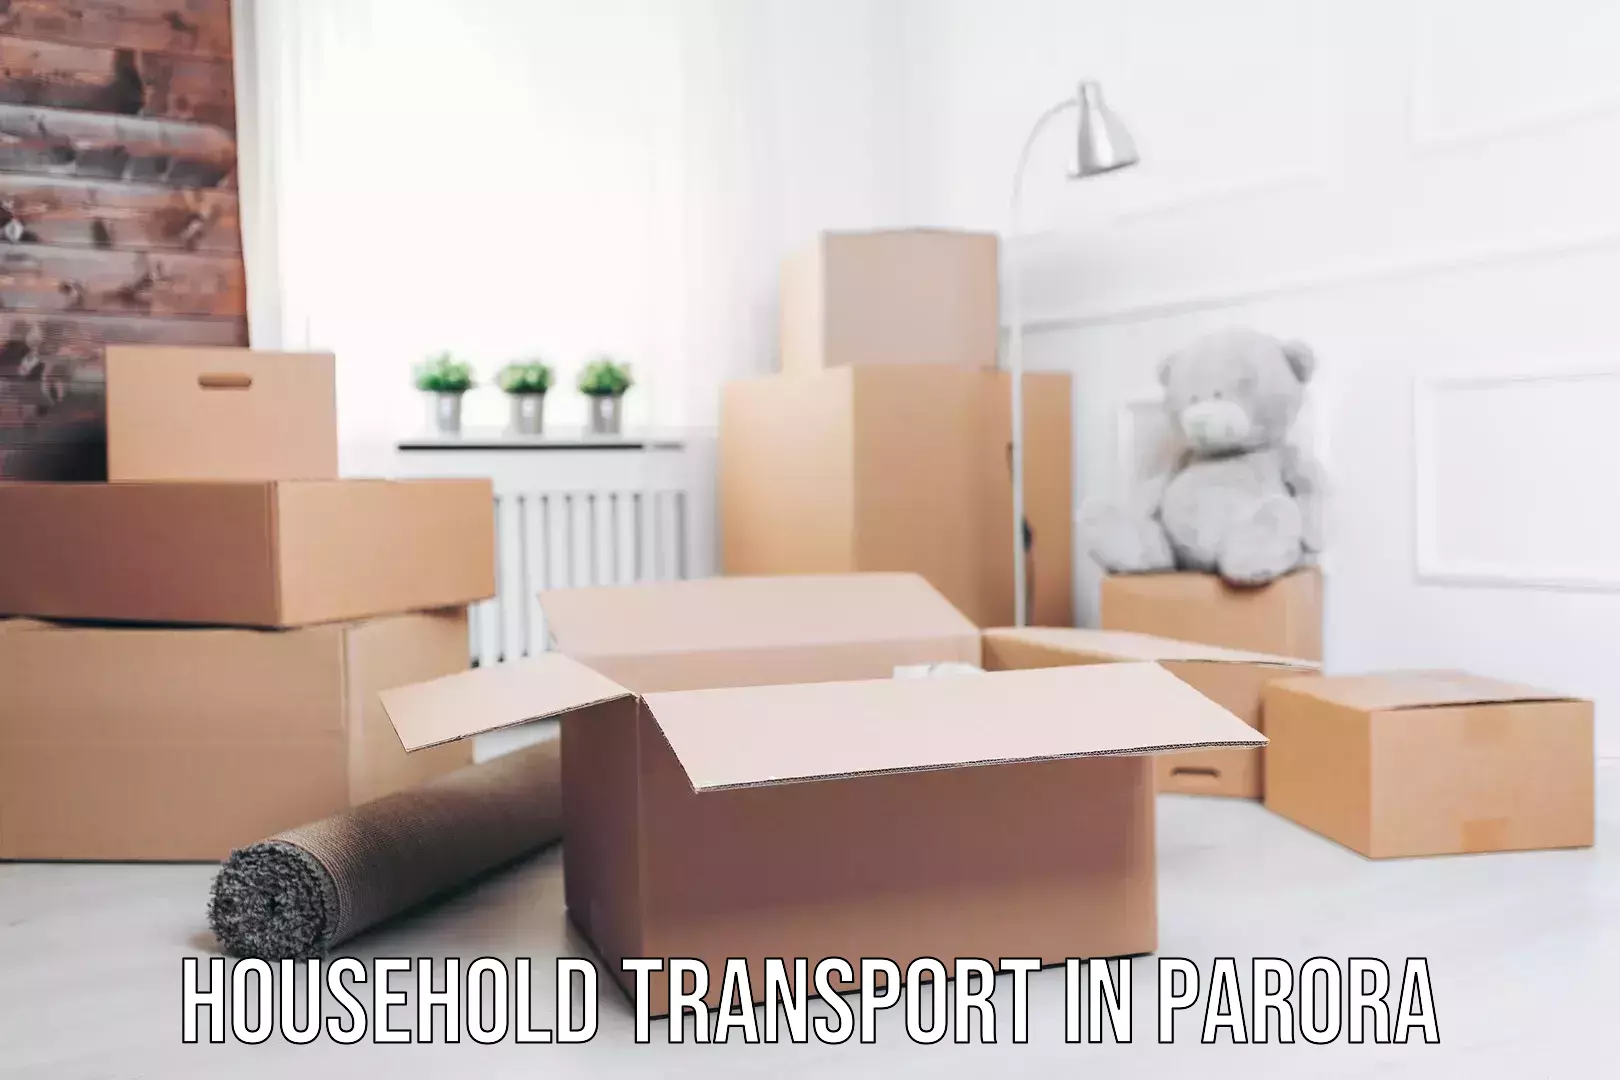 Home shifting experts in Parora